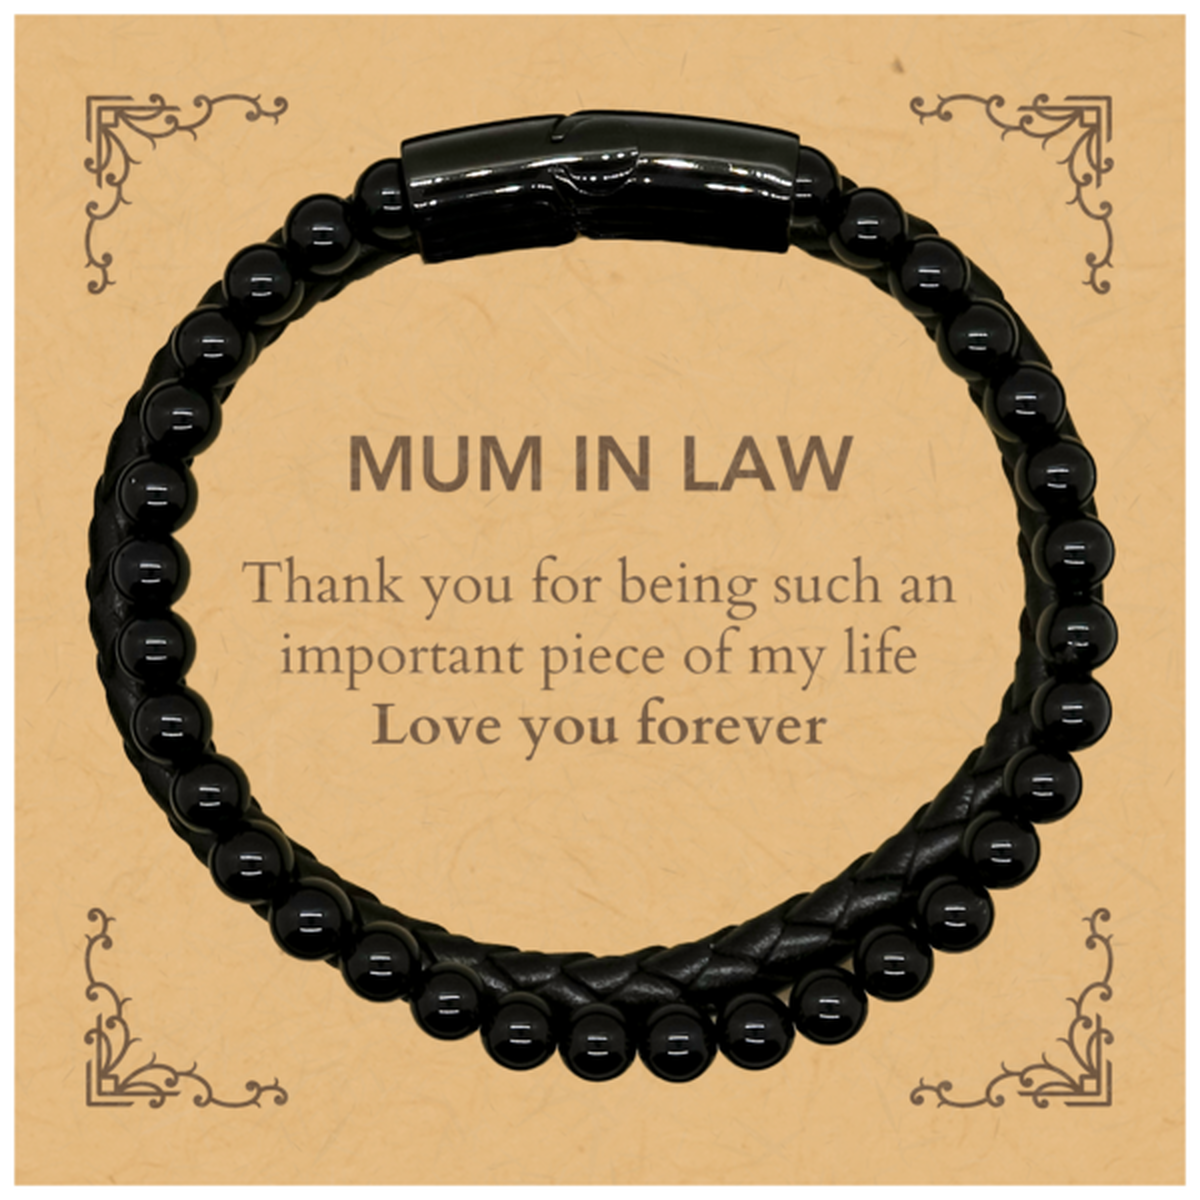 Appropriate Mum In Law  Stone Leather Bracelets Epic Birthday Gifts for Mum In Law  Thank you for being such an important piece of my life Mum In Law  Christmas Mothers Fathers Day